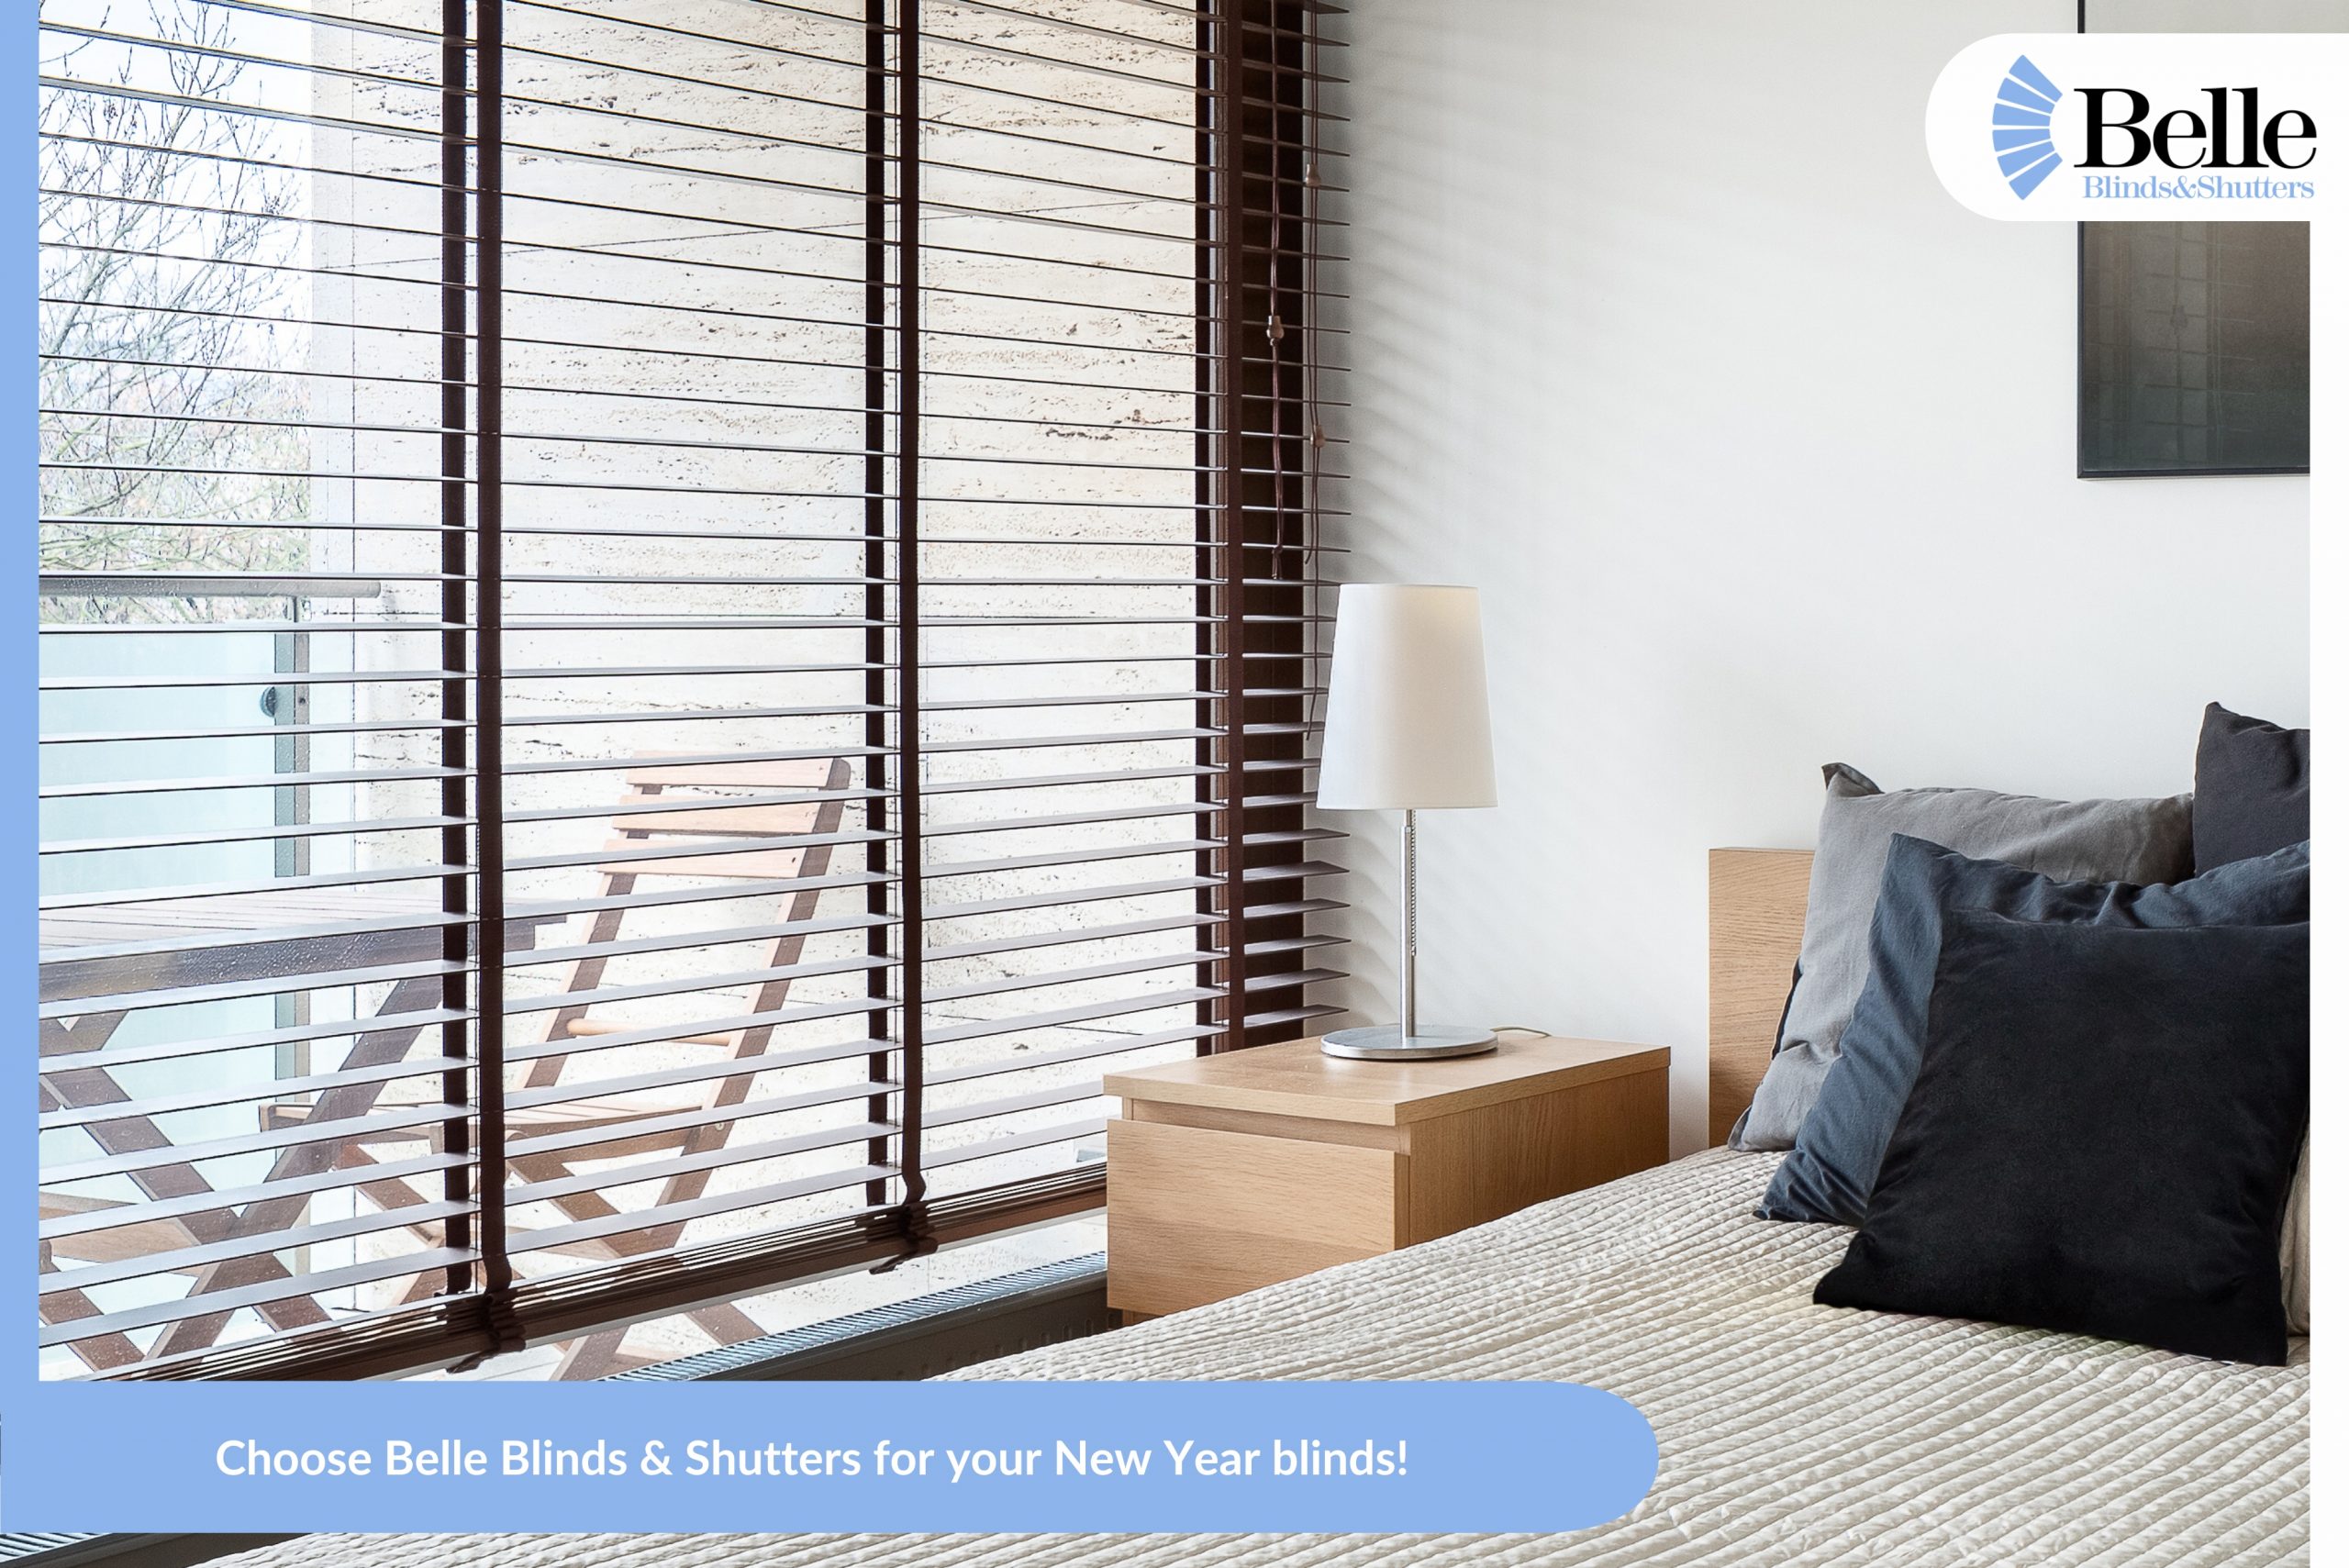 Choose Belle Blinds & Shutters For Your New Year Blinds!